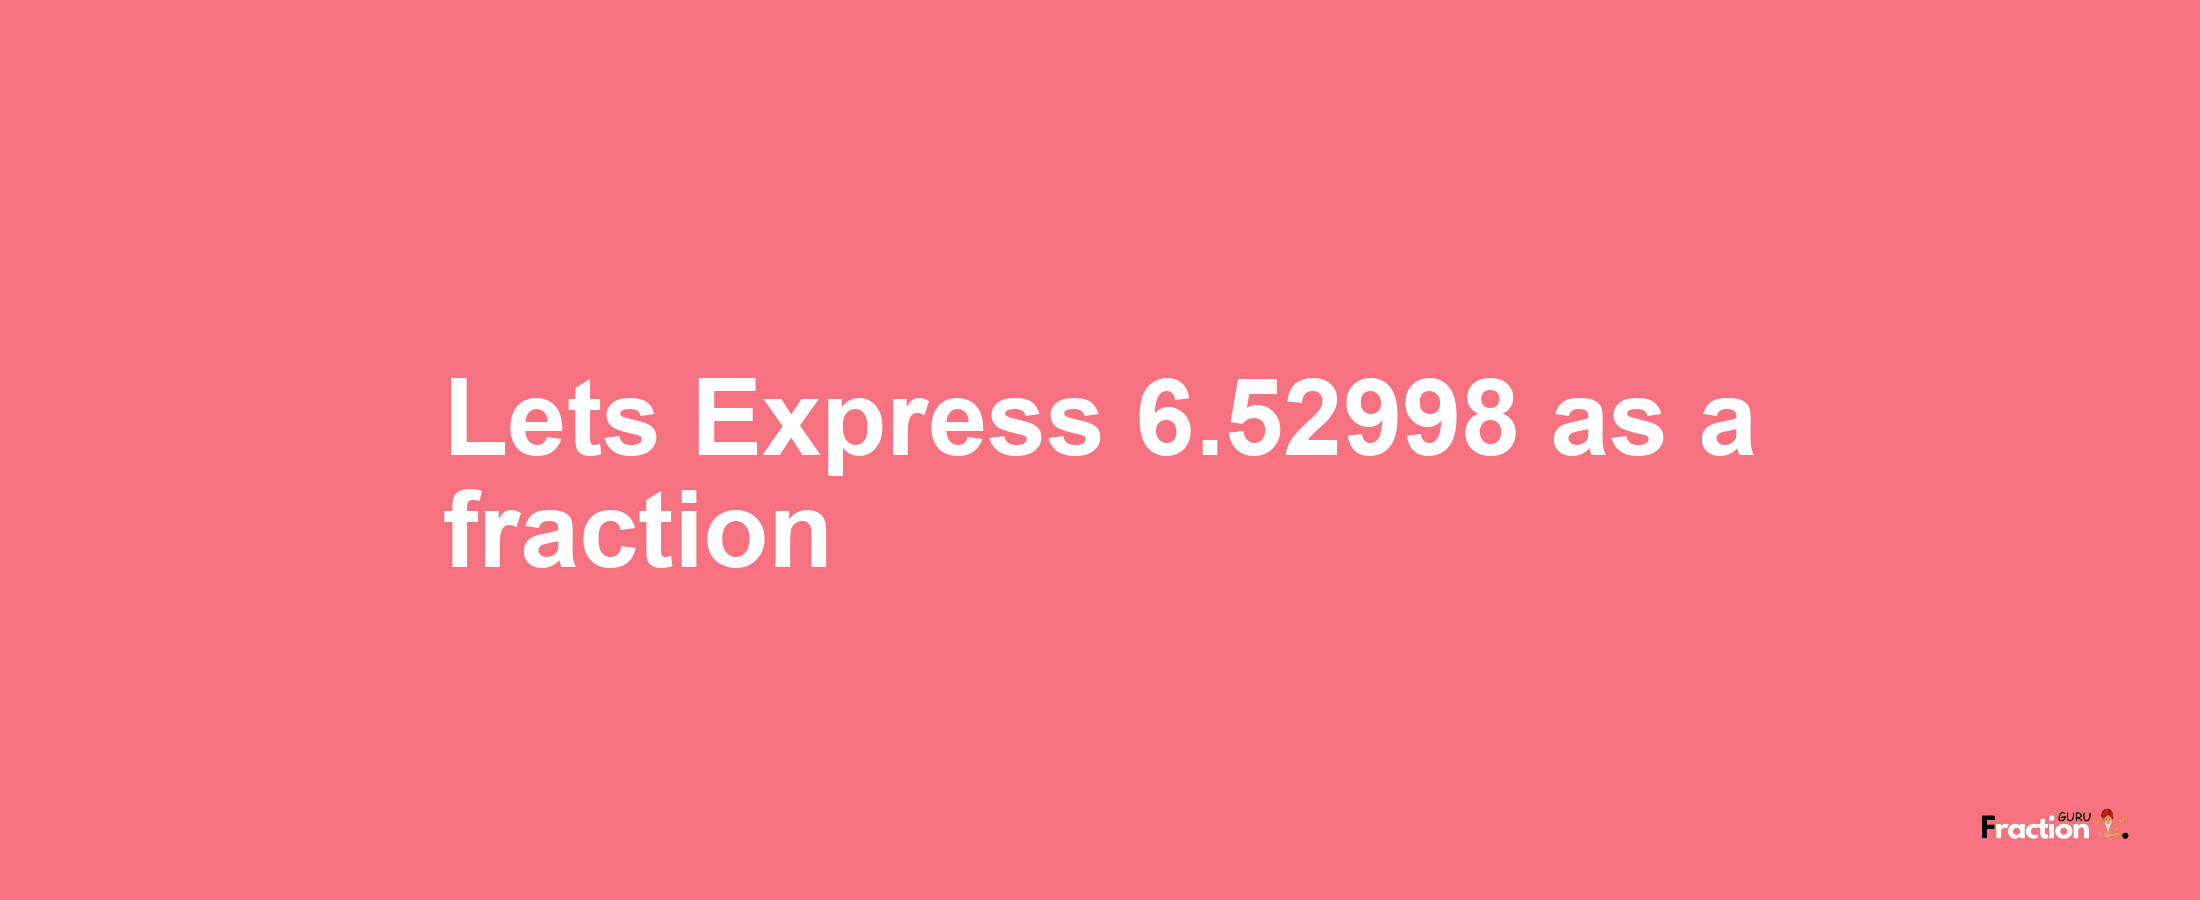 Lets Express 6.52998 as afraction